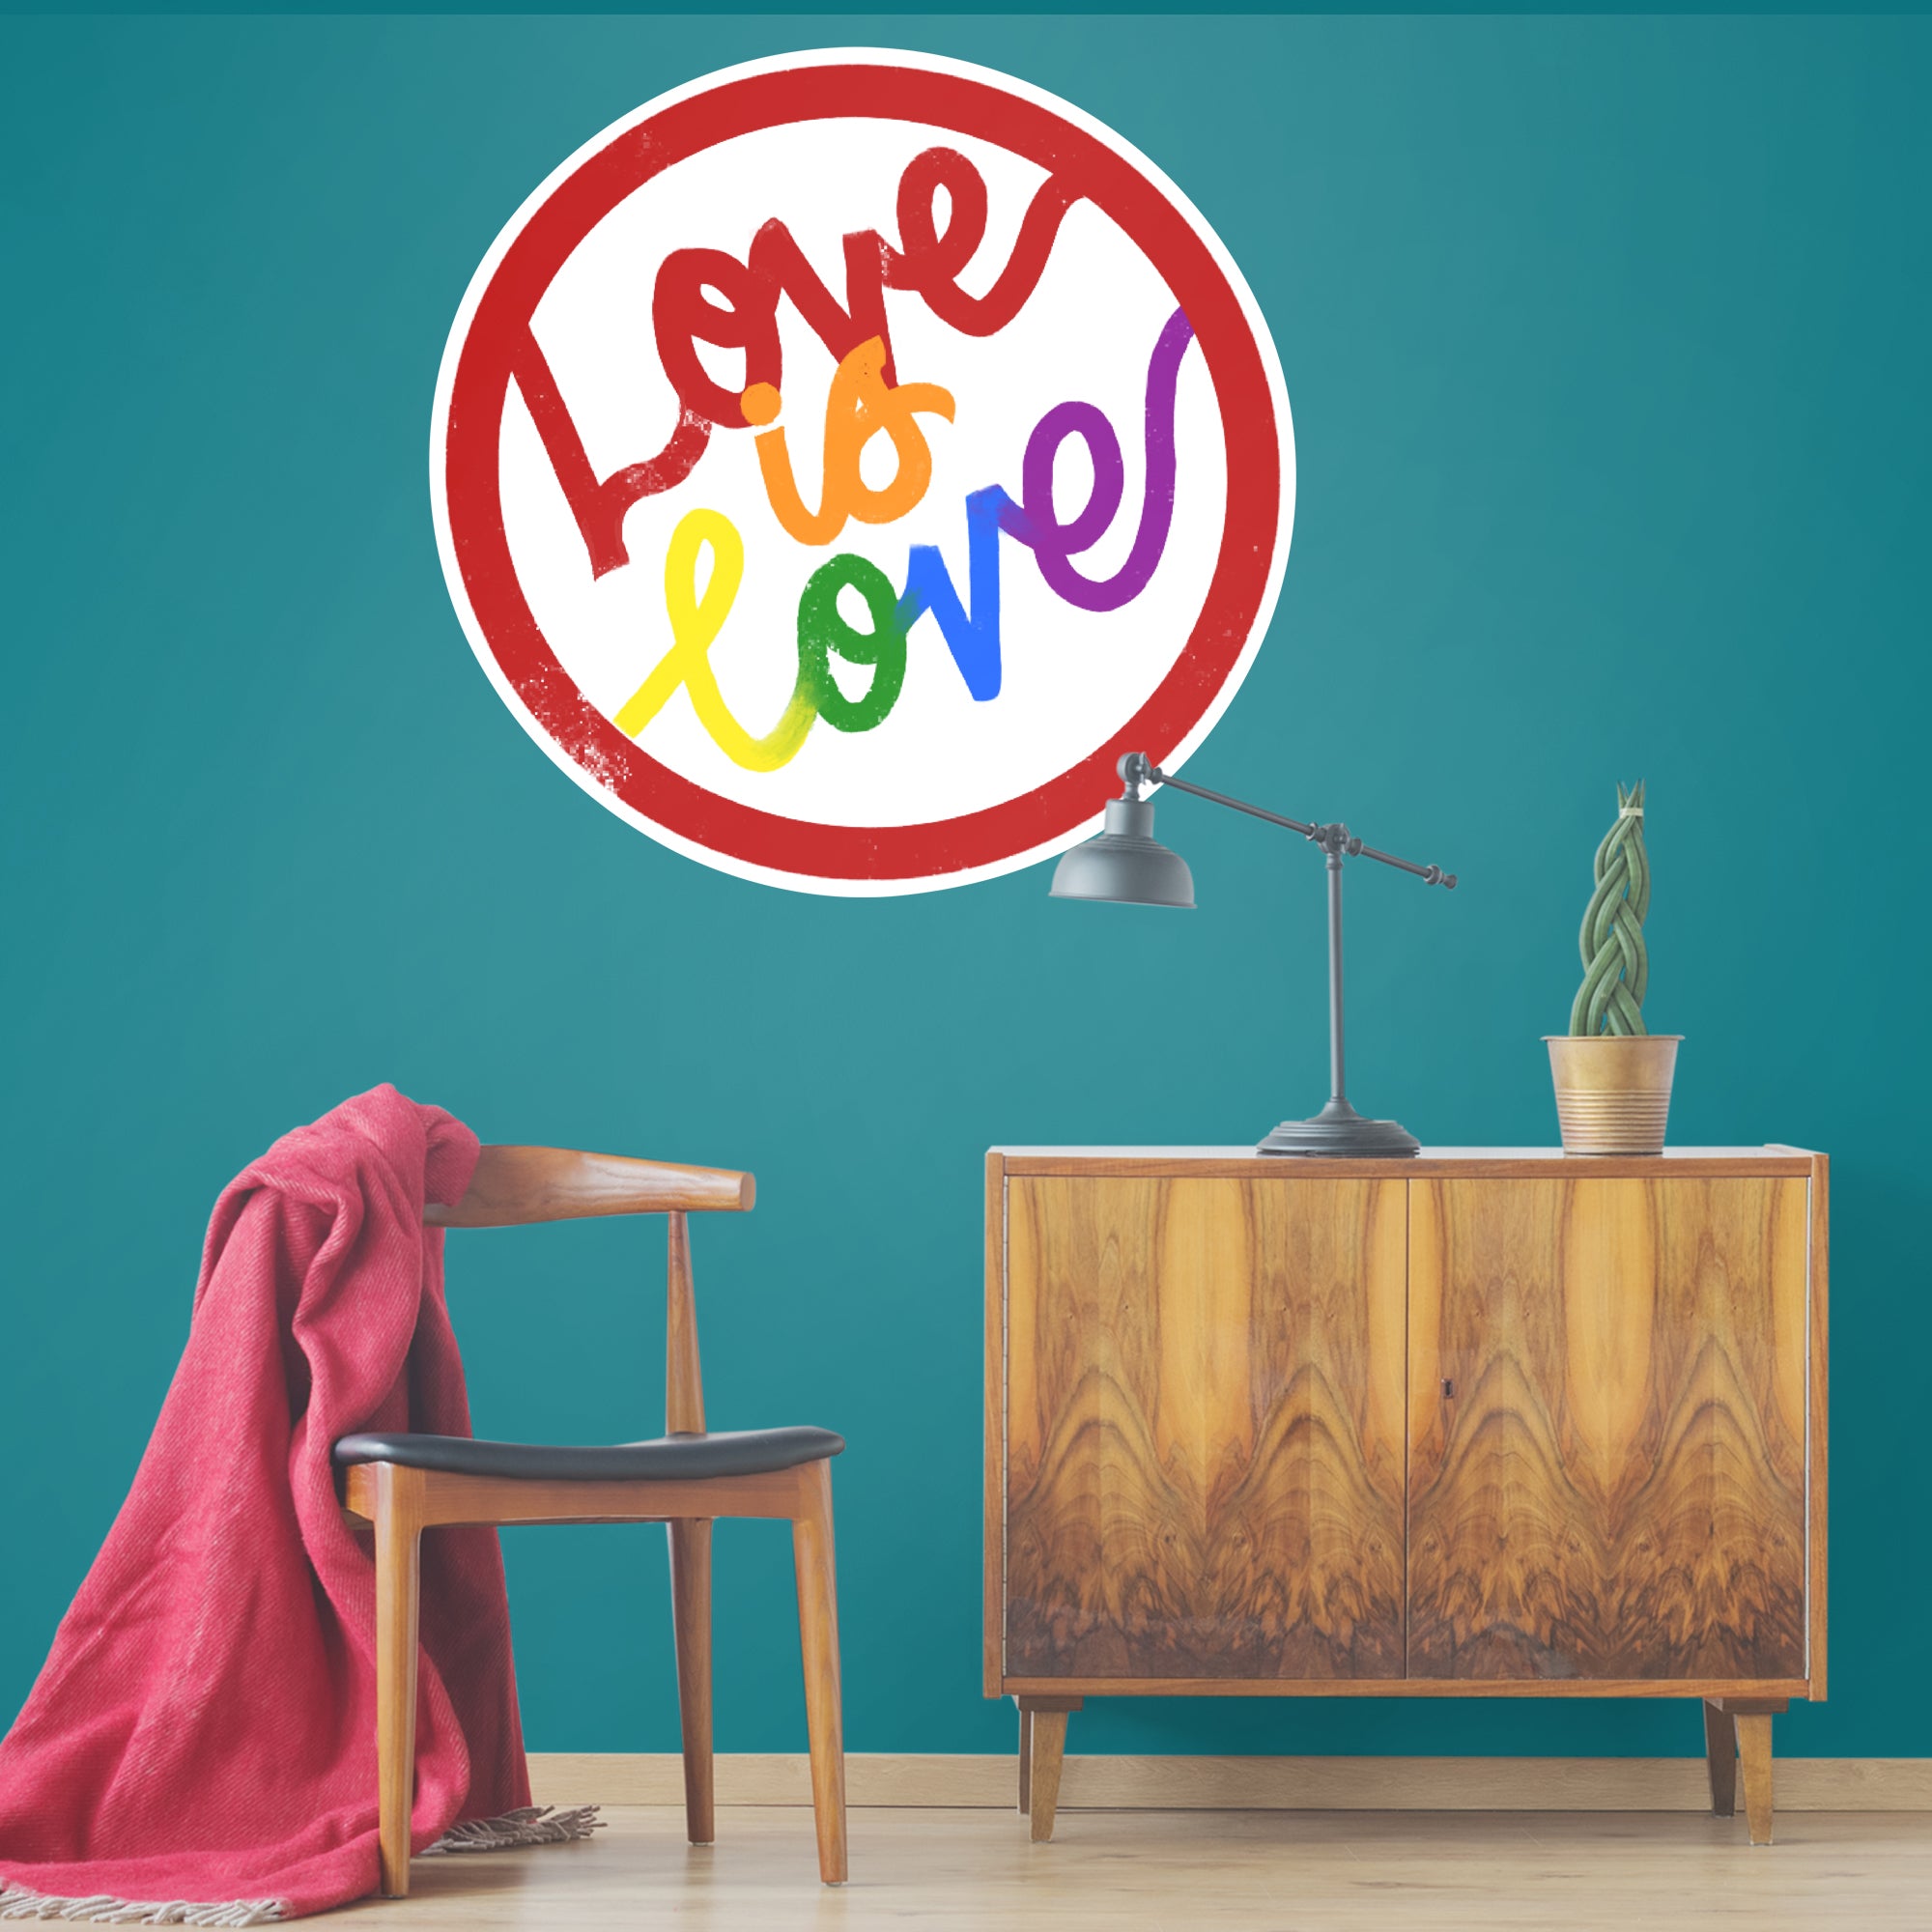 Love Is Love - Officially Licensed Big Moods Removable Wall Decal Giant Decal (37"W x 37"H) by Fathead | Vinyl